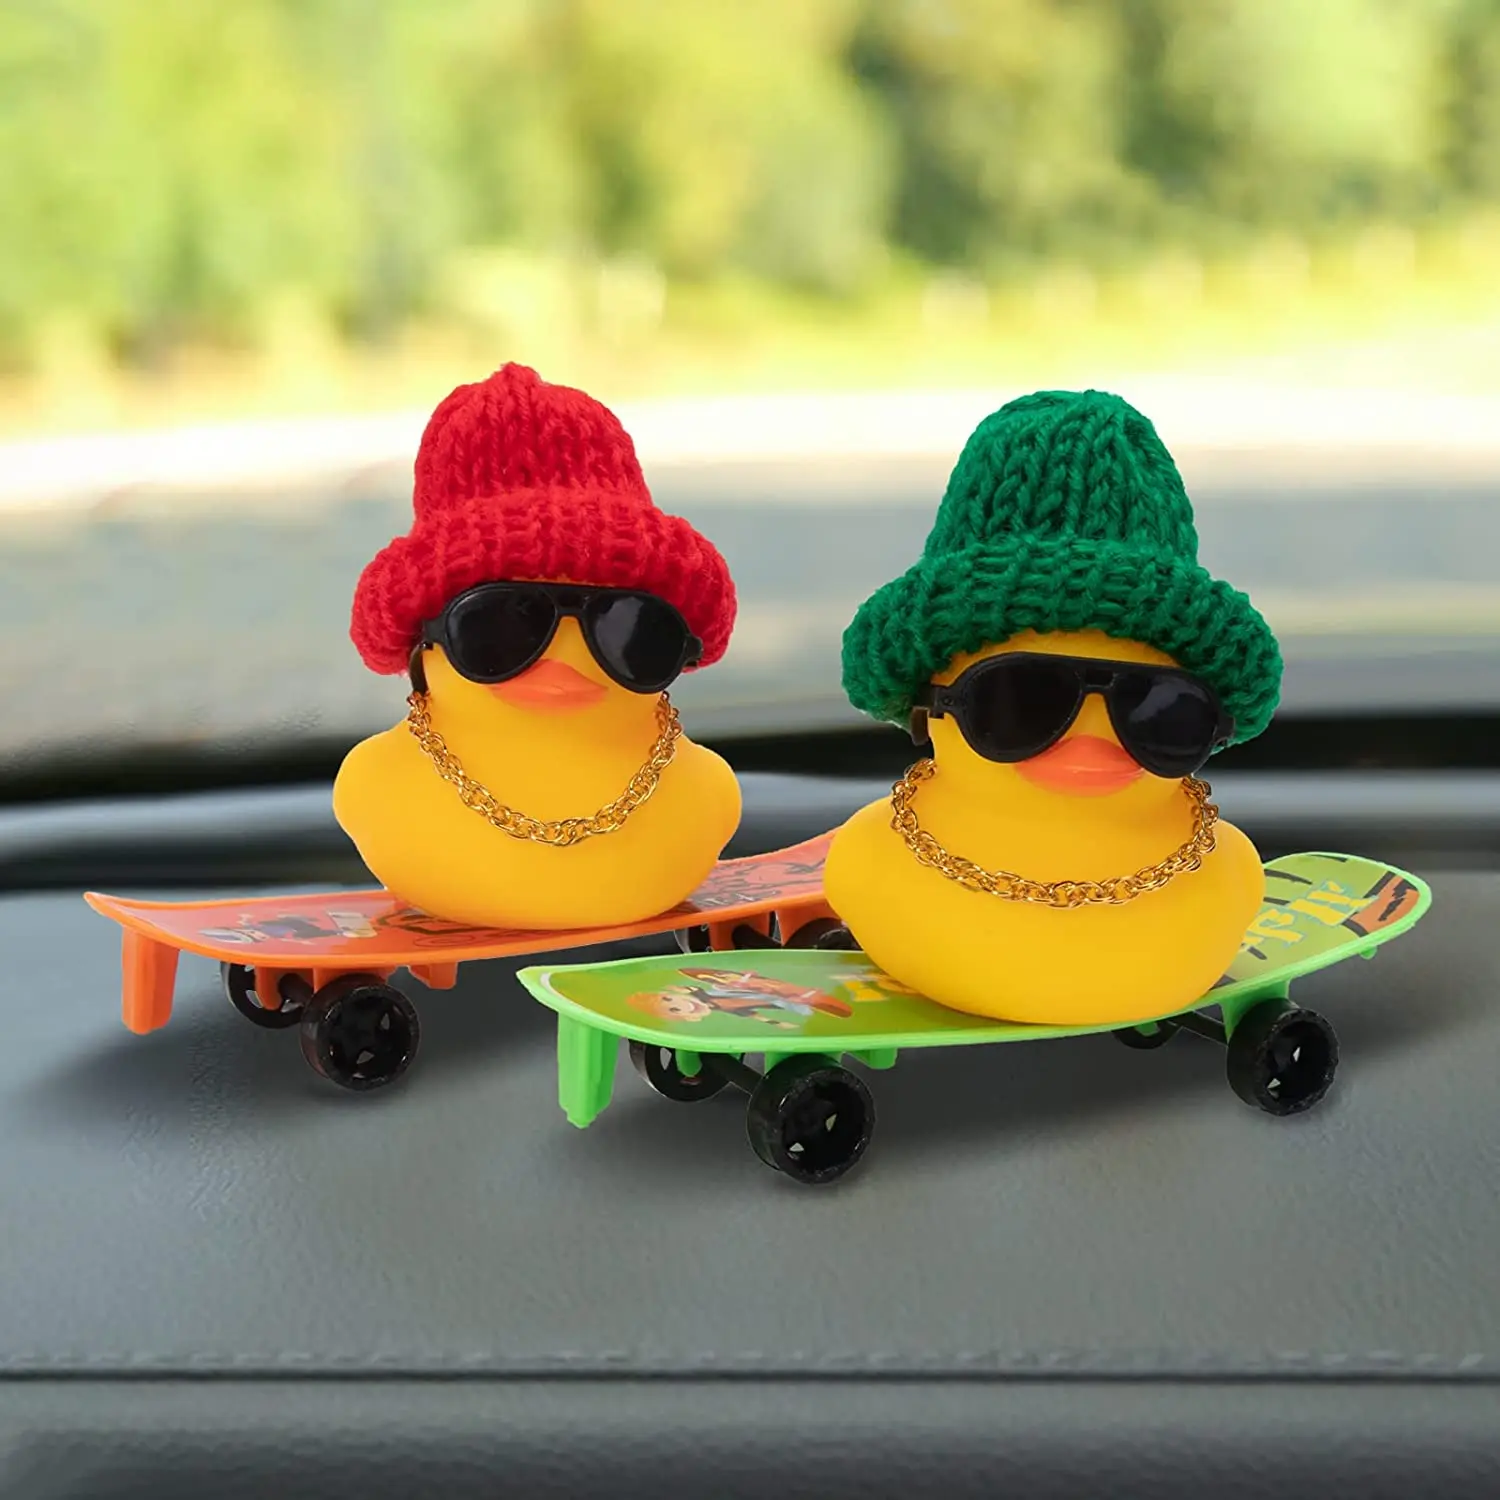 Er ducks rubber duck car decoration dashboard car ornament with mini chair hat necklace thumb200